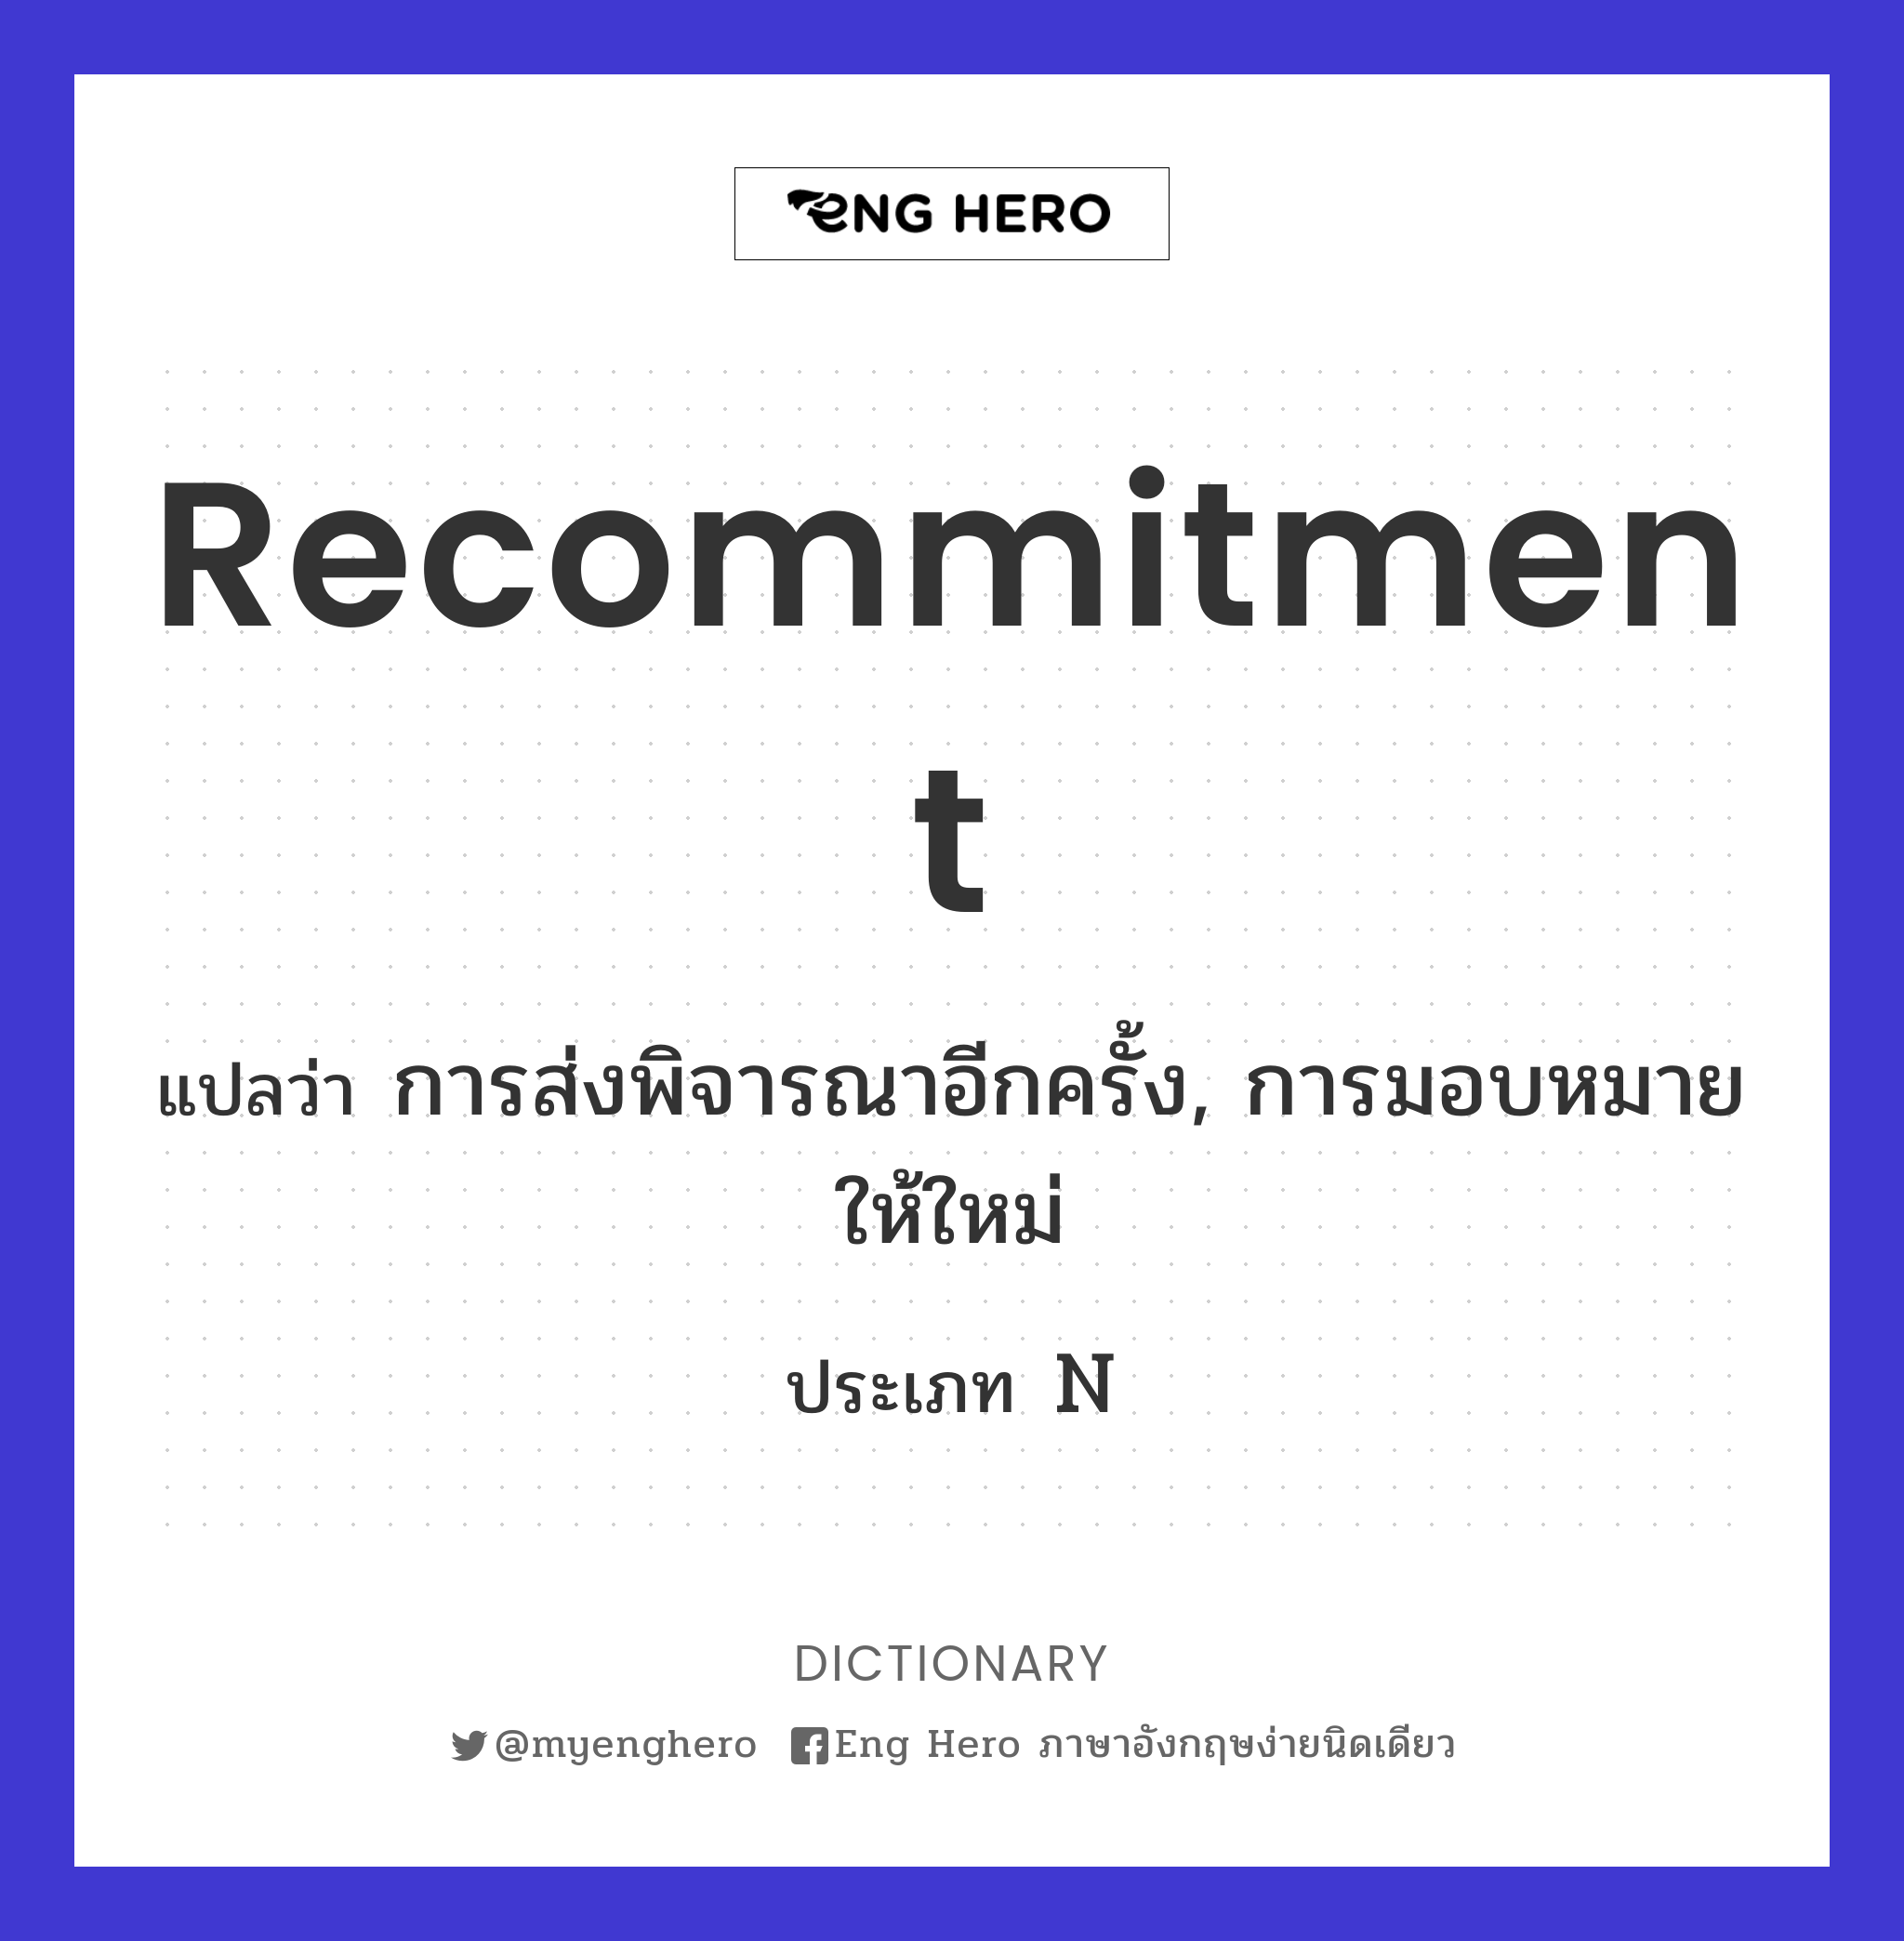 recommitment